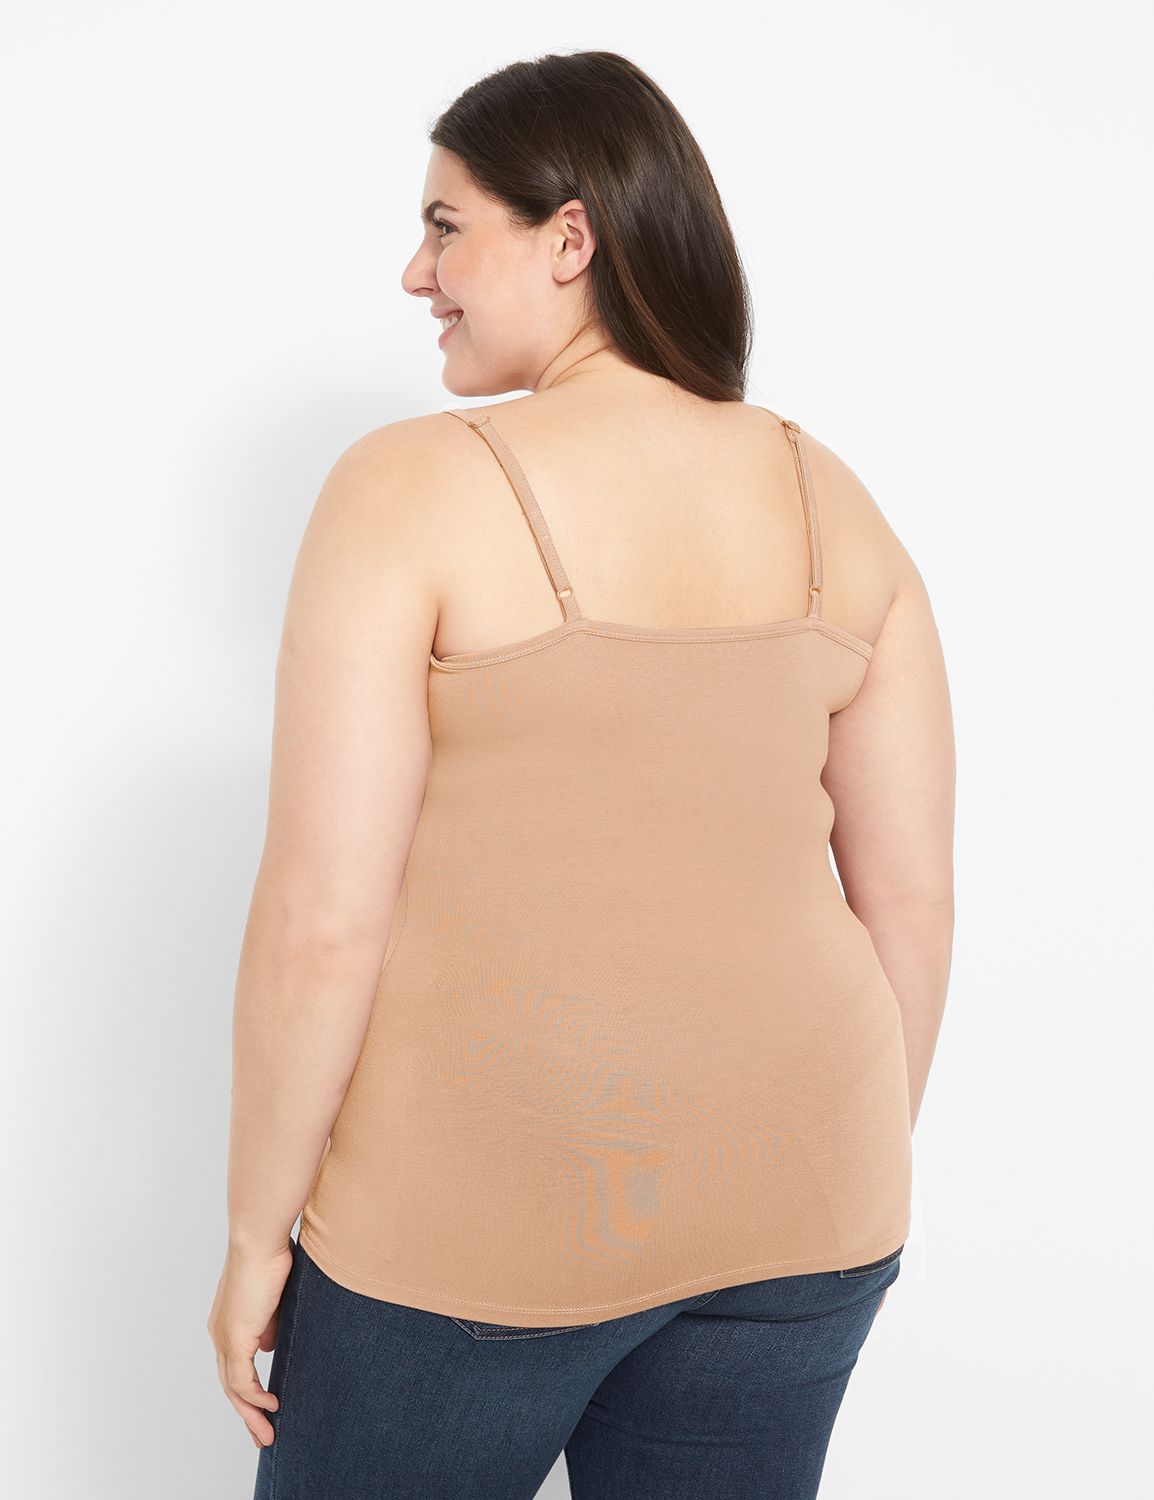 Plus Size Tank Tops and Camis, Everyday Low Prices